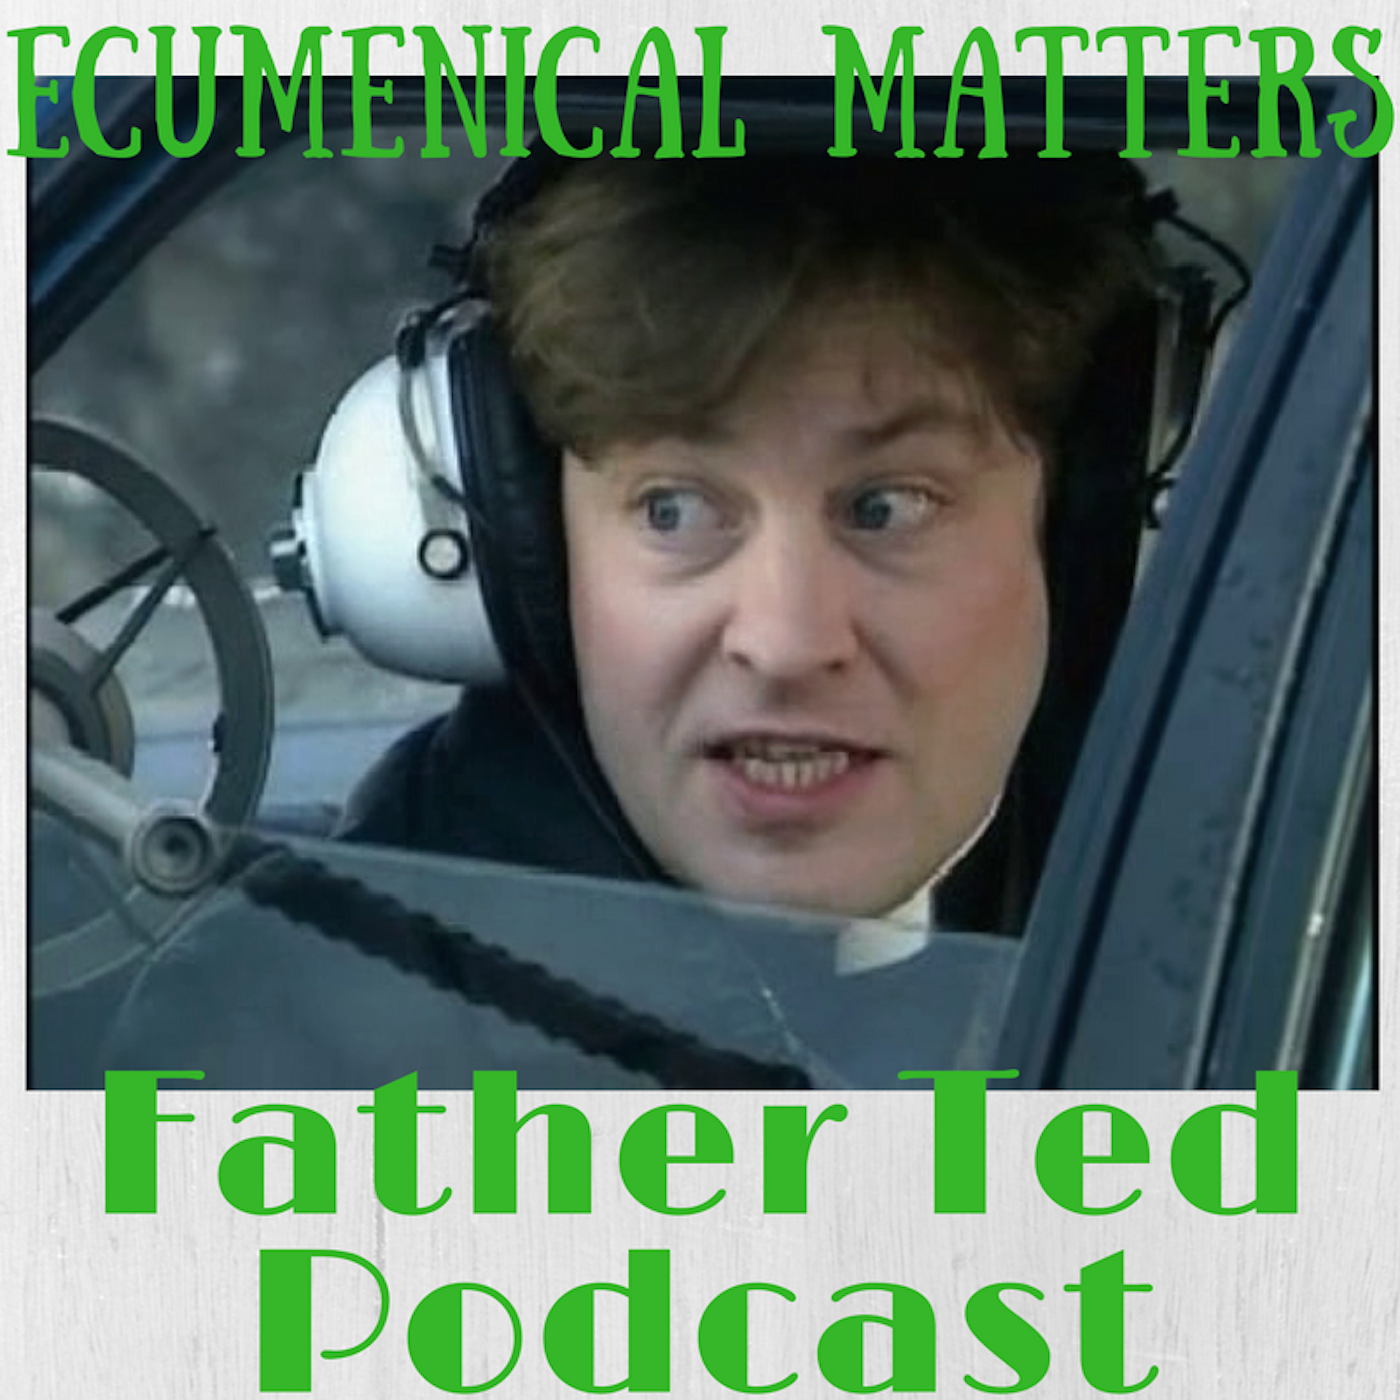 Episode 7 Hell Ecumenical Matters The Father Ted Podcast